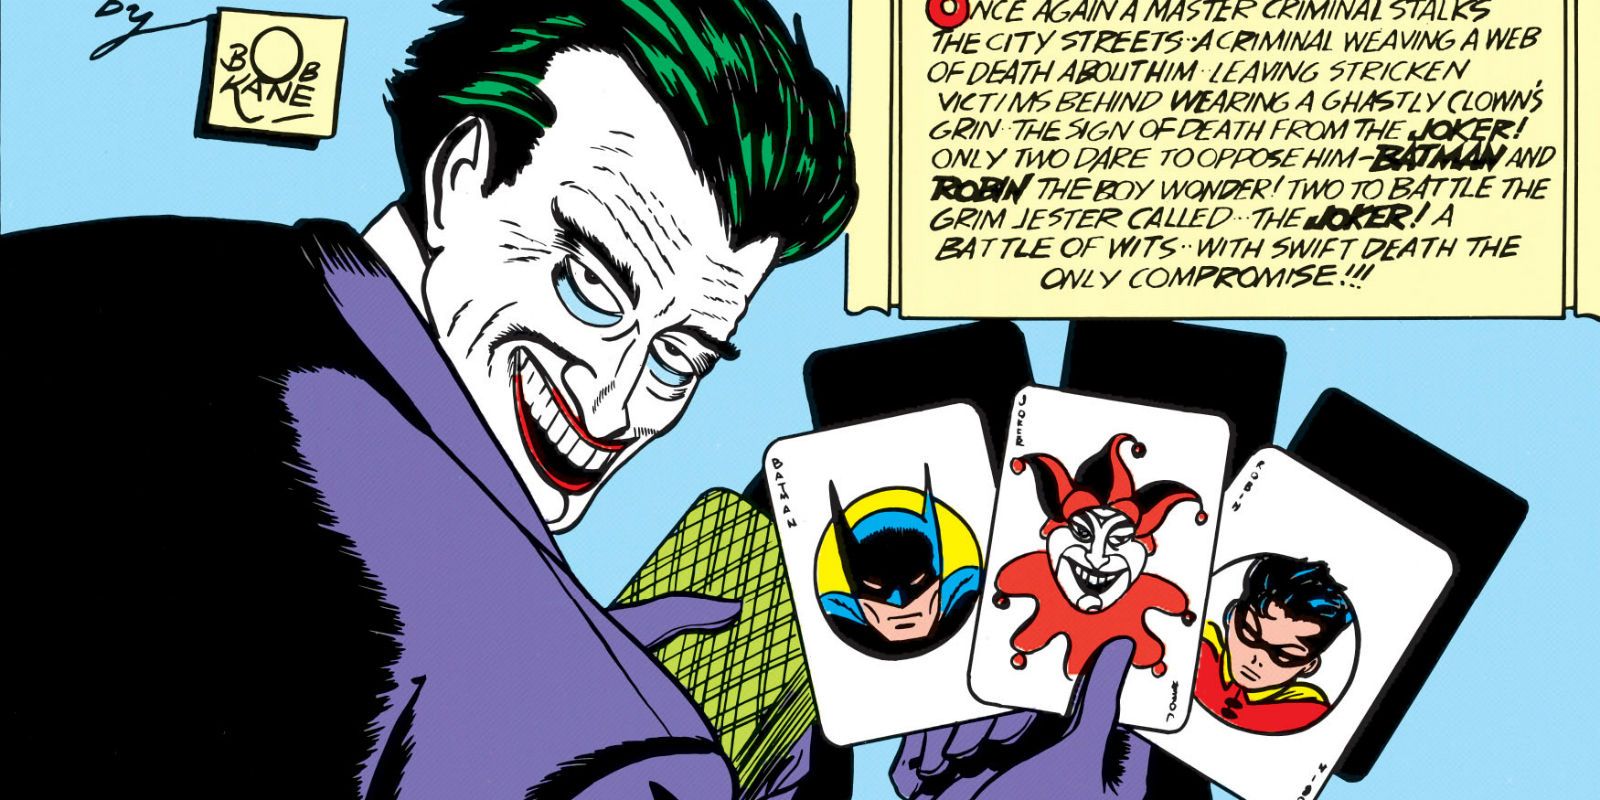 The Joker's First Issue Batman #1 in April 1940